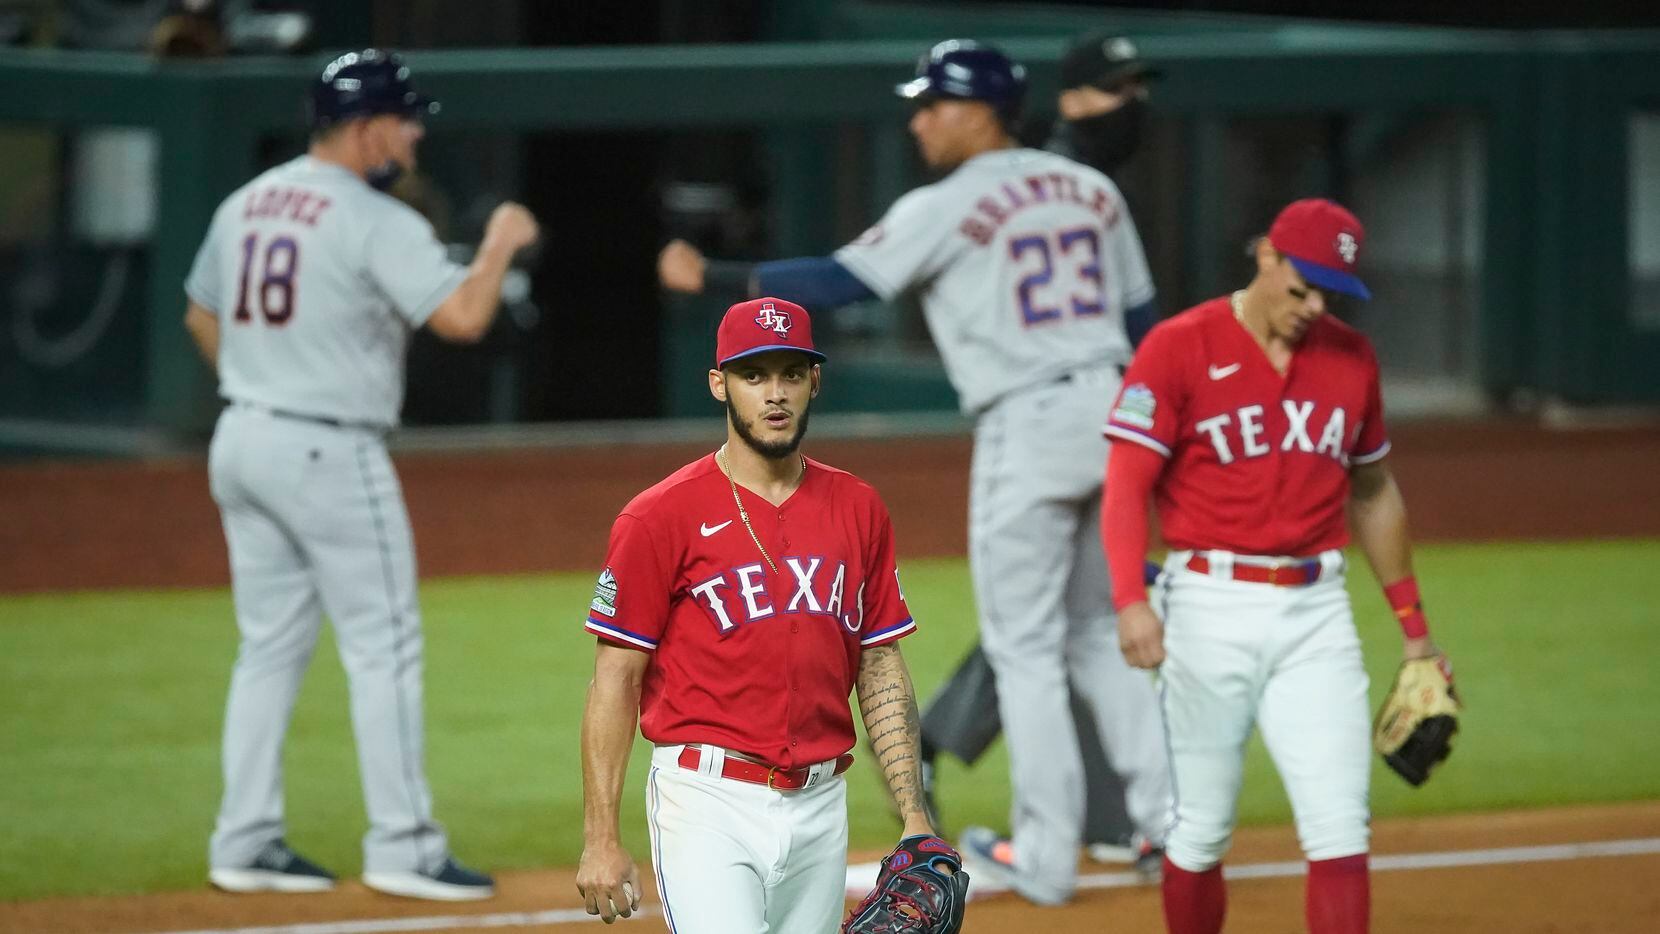 Texas Rangers pitcher Jonathan Hernandez and third baseman Derek Dietrich react after a single by Houston Astros first baseman Yuli Gurriel scored Jose Altuve to give the Astros a 3-2 lead during the eighth inning at Globe Life Field on Friday, Sept. 25, 2020.